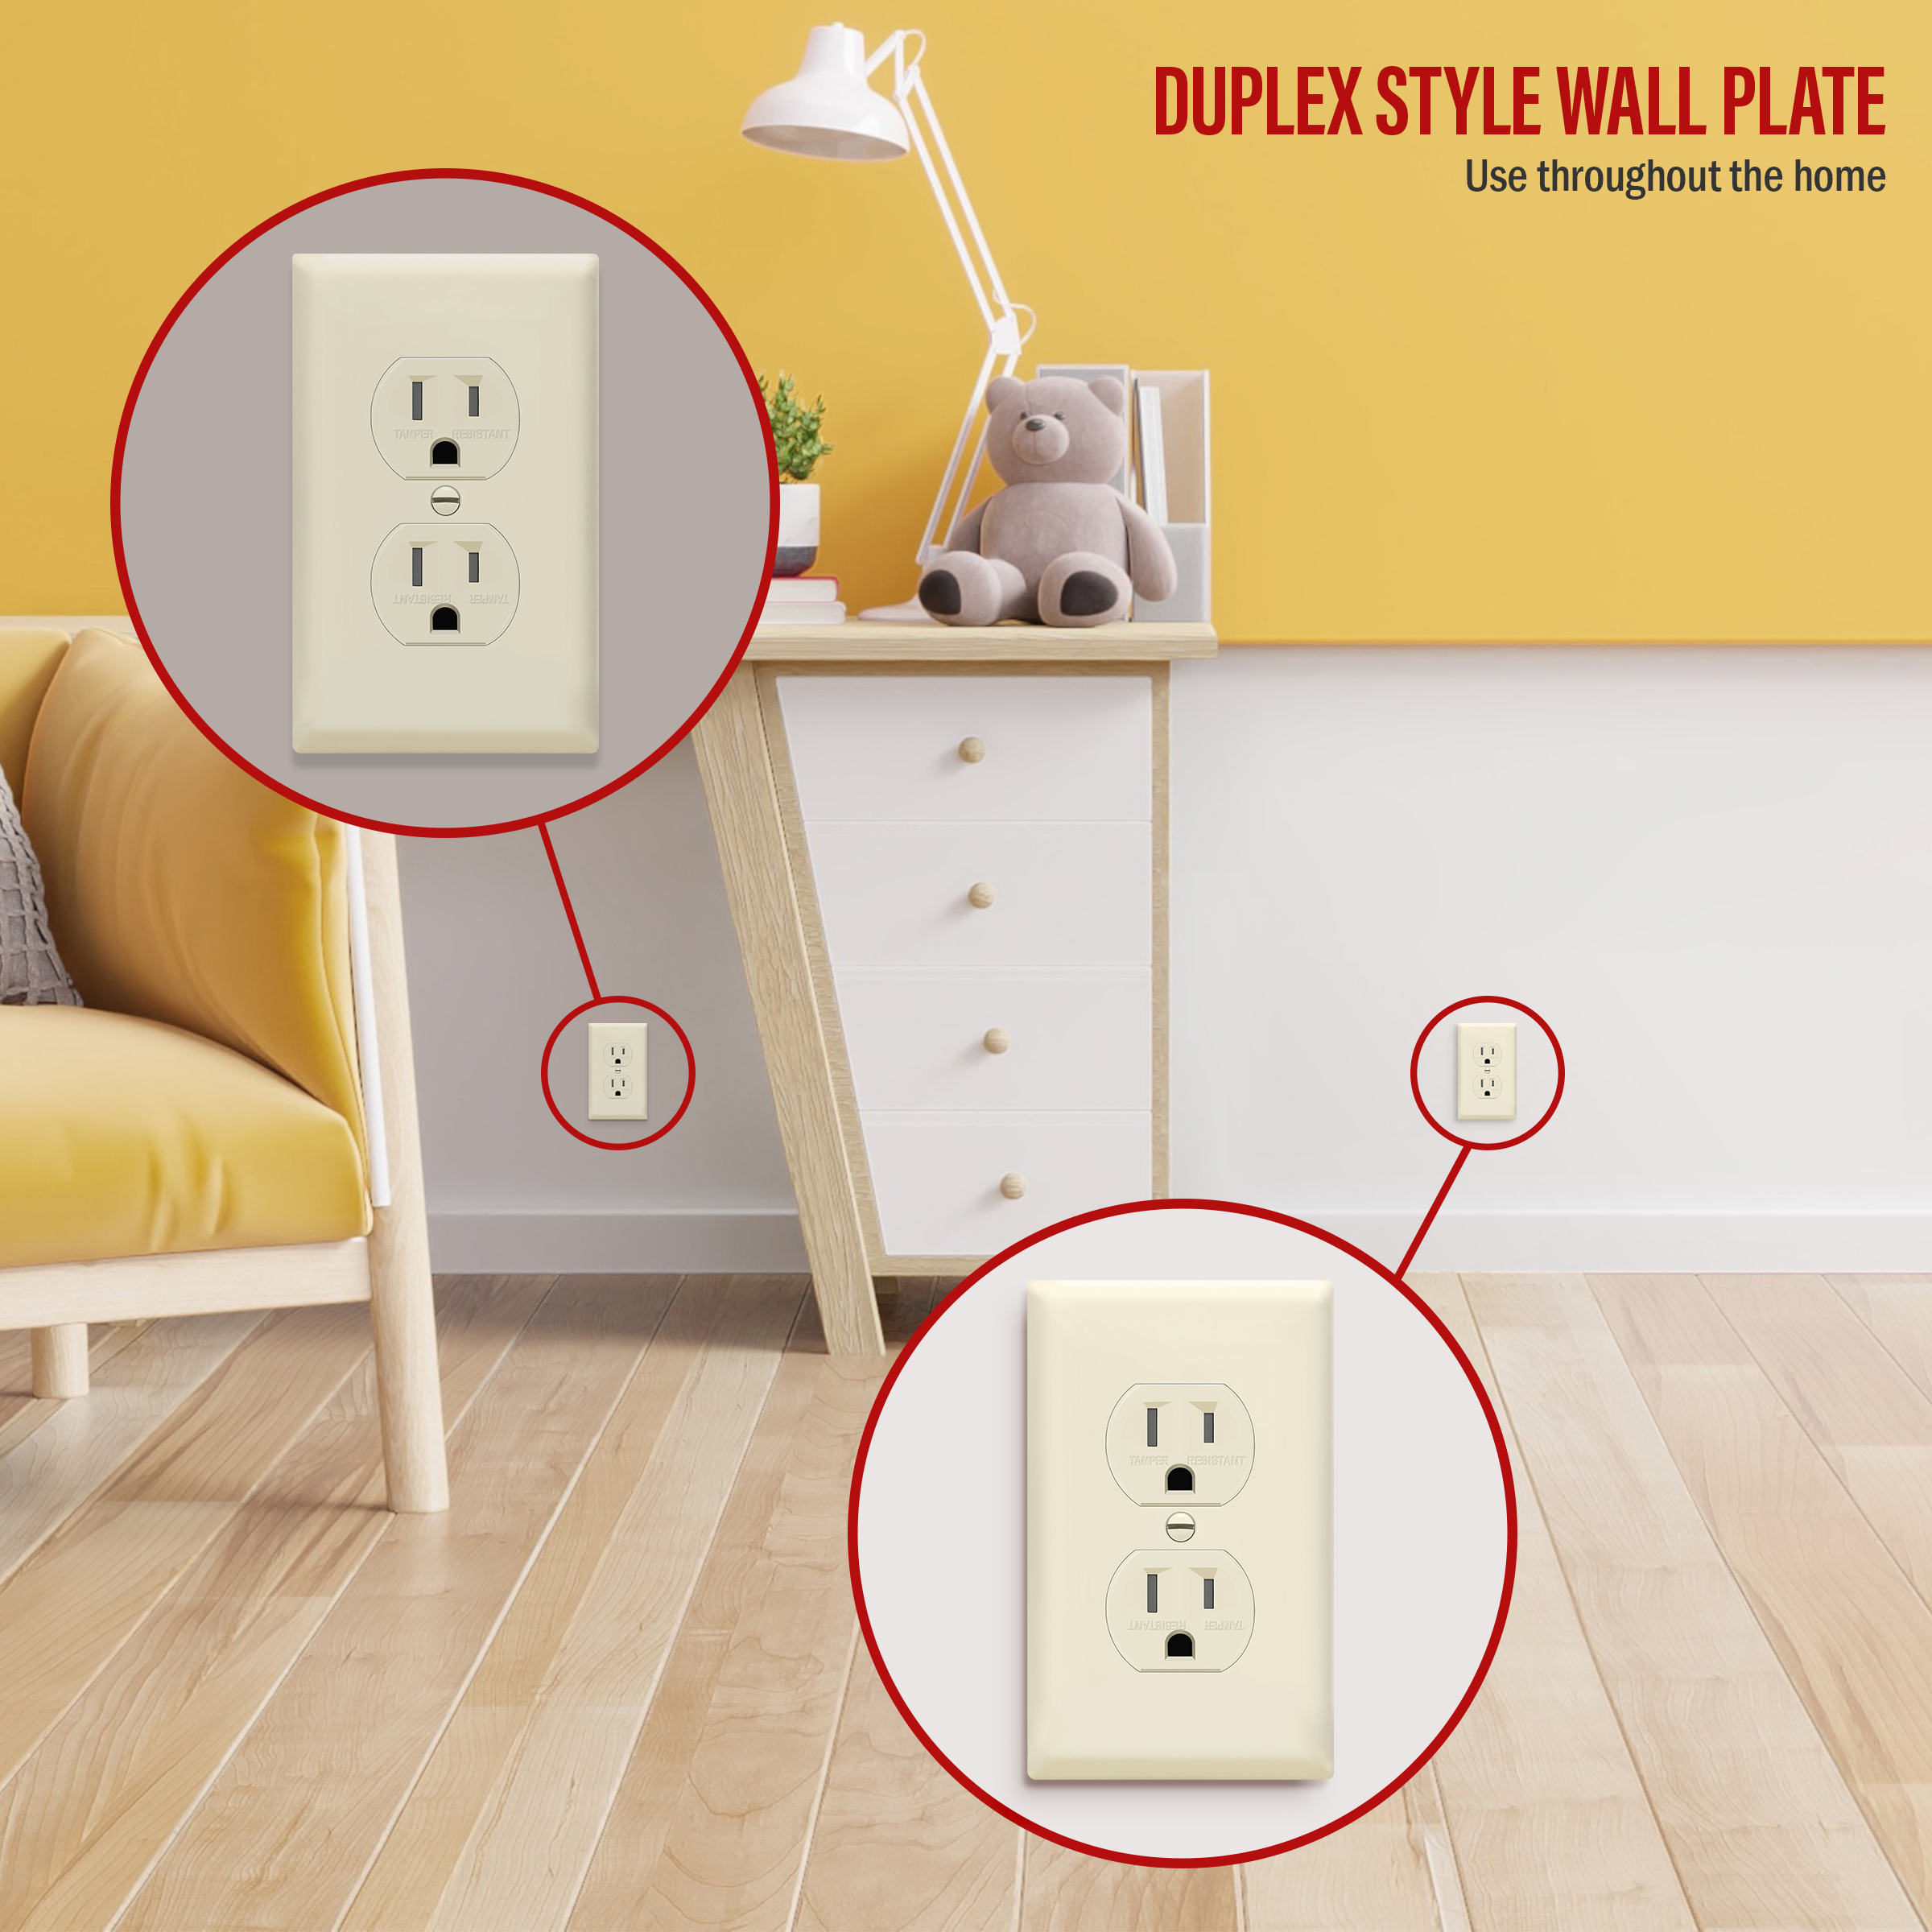 ENERLITES Duplex Receptacle Outlet Wall Plate, Size 1-Gang 4.50" x 2.76", Unbreakable Polycarbonate Thermoplastic, UL Listed, 8821-LA-10PCS, Light Almond (10 Pack) - image 2 of 5